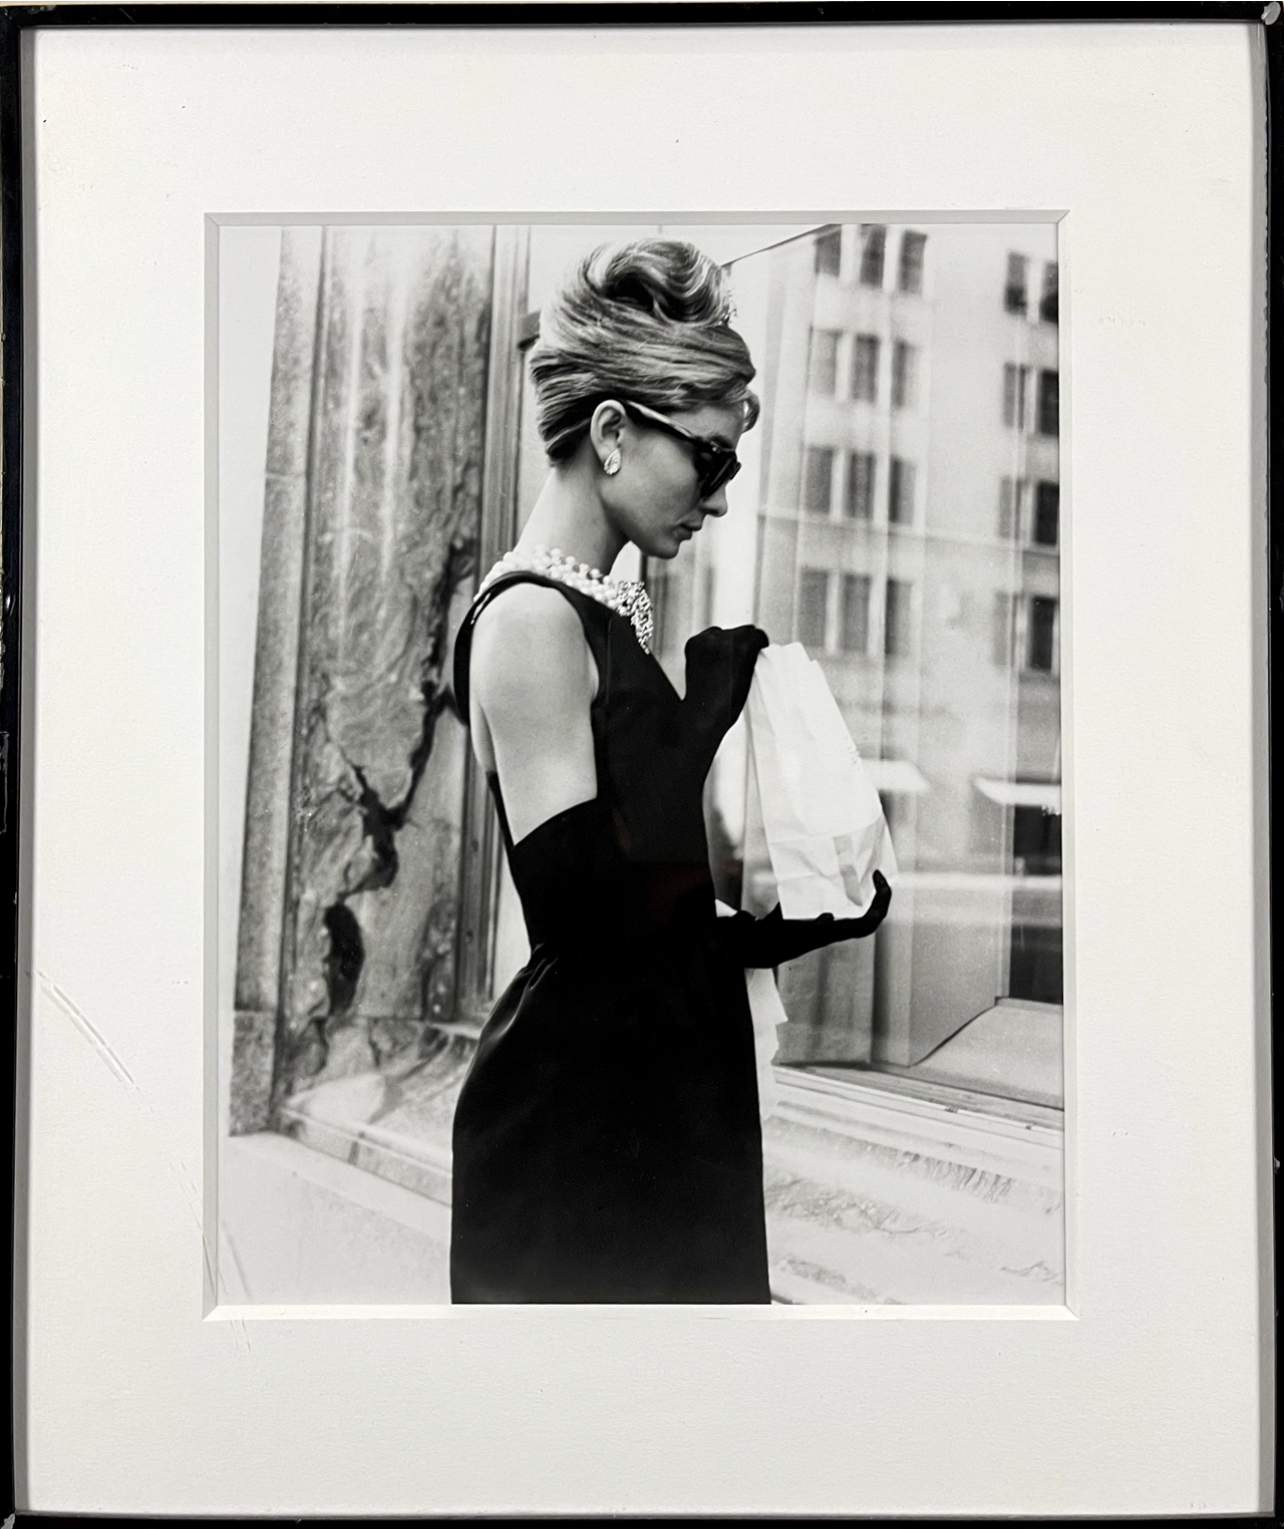 Audrey Hepburn - Lunch on 5th Avenue during Breakfast at Tiffany's ...